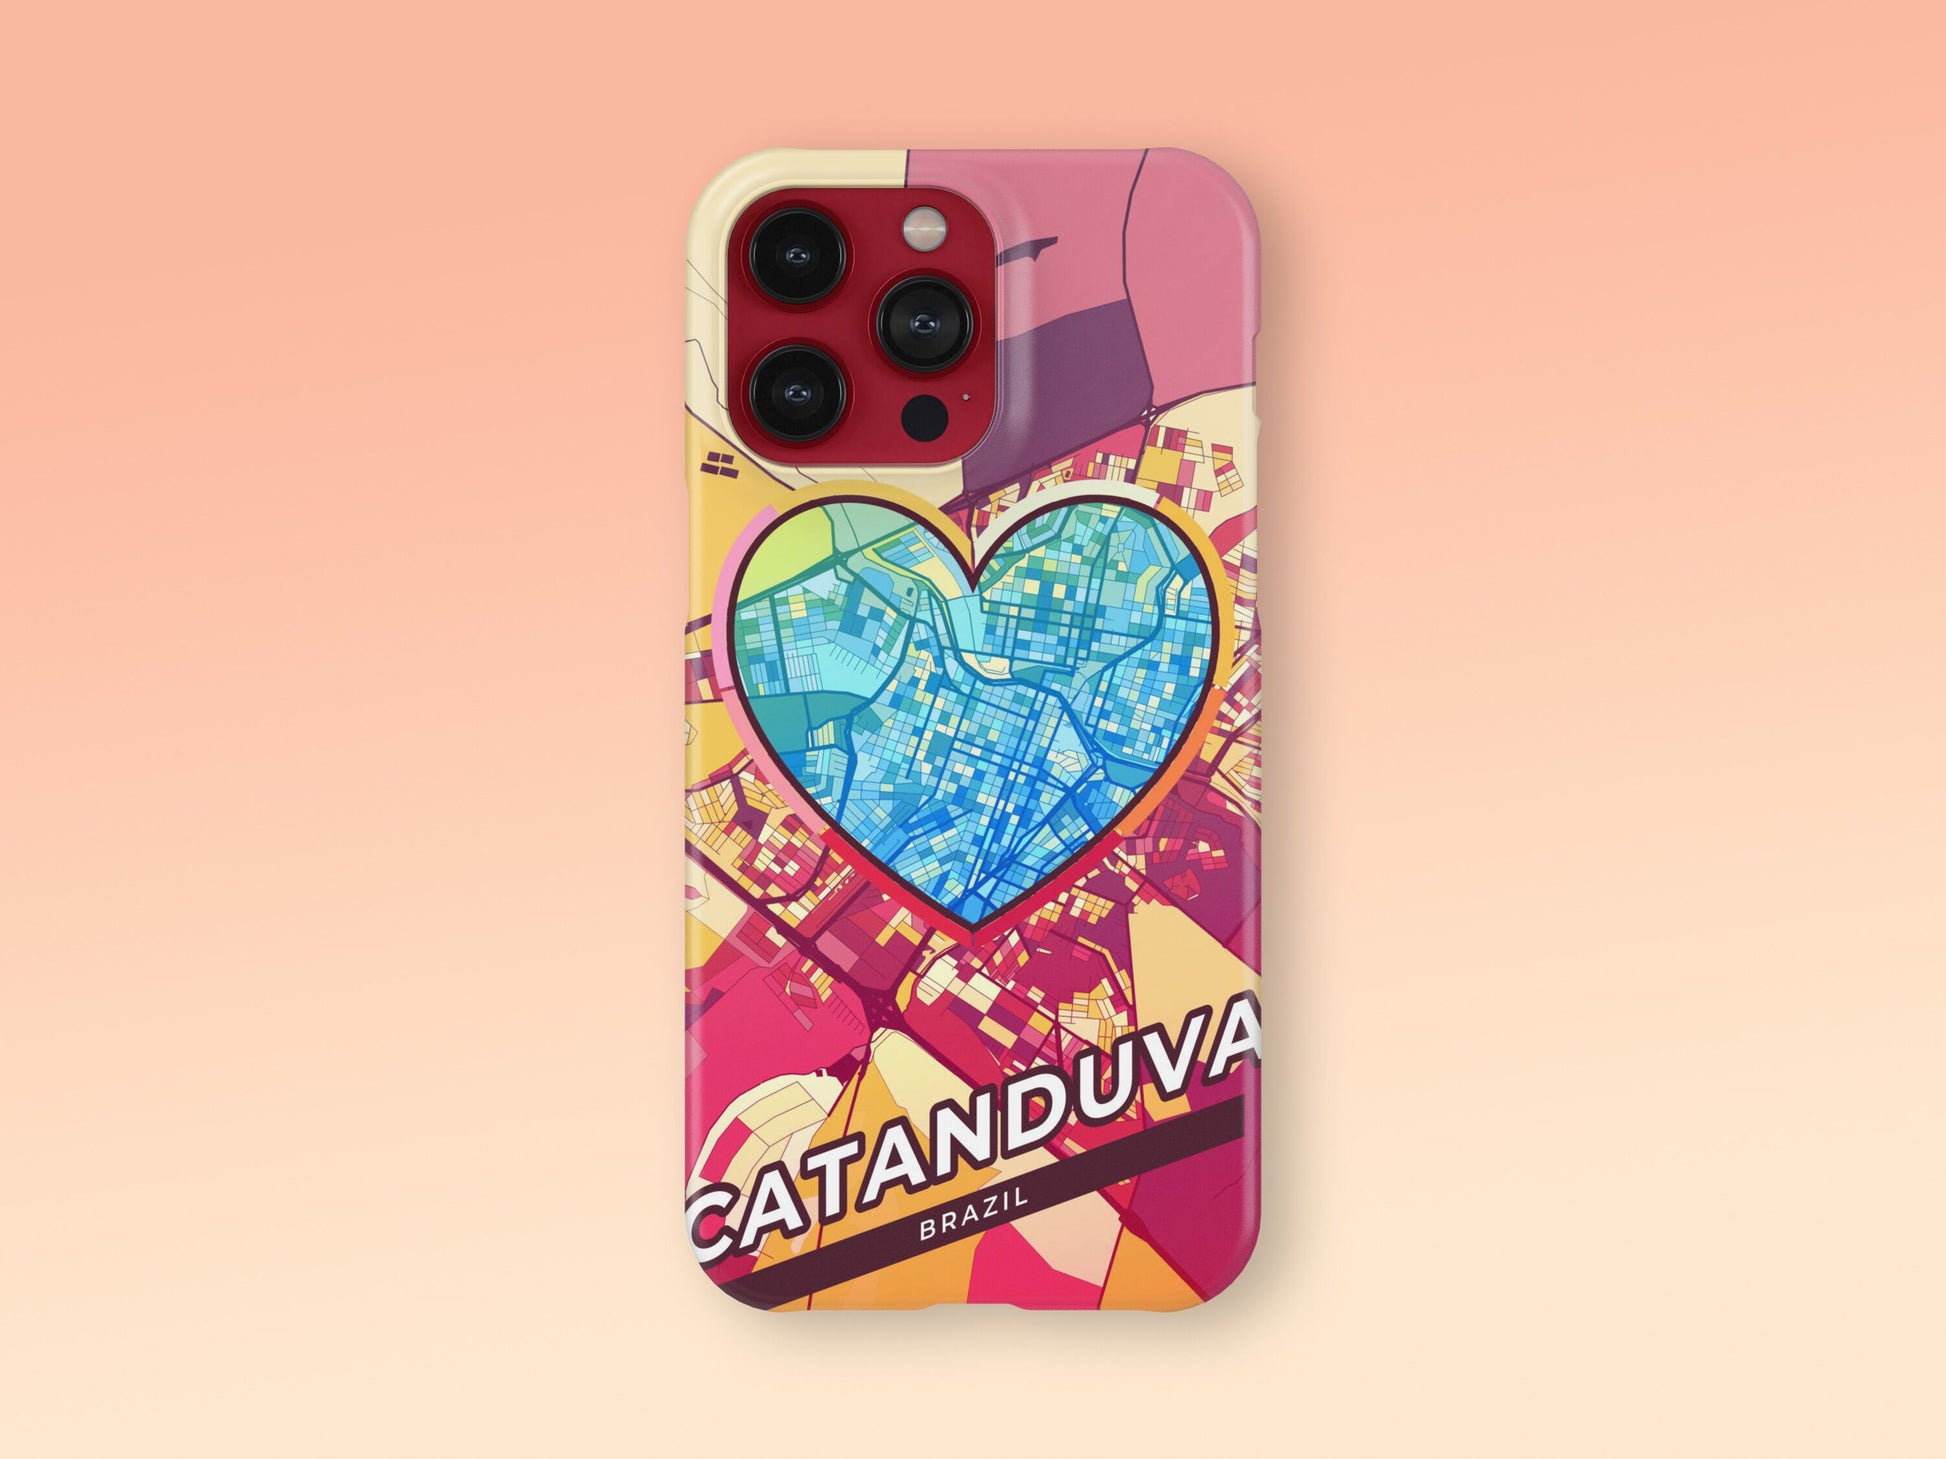 Catanduva Brazil slim phone case with colorful icon. Birthday, wedding or housewarming gift. Couple match cases. 2